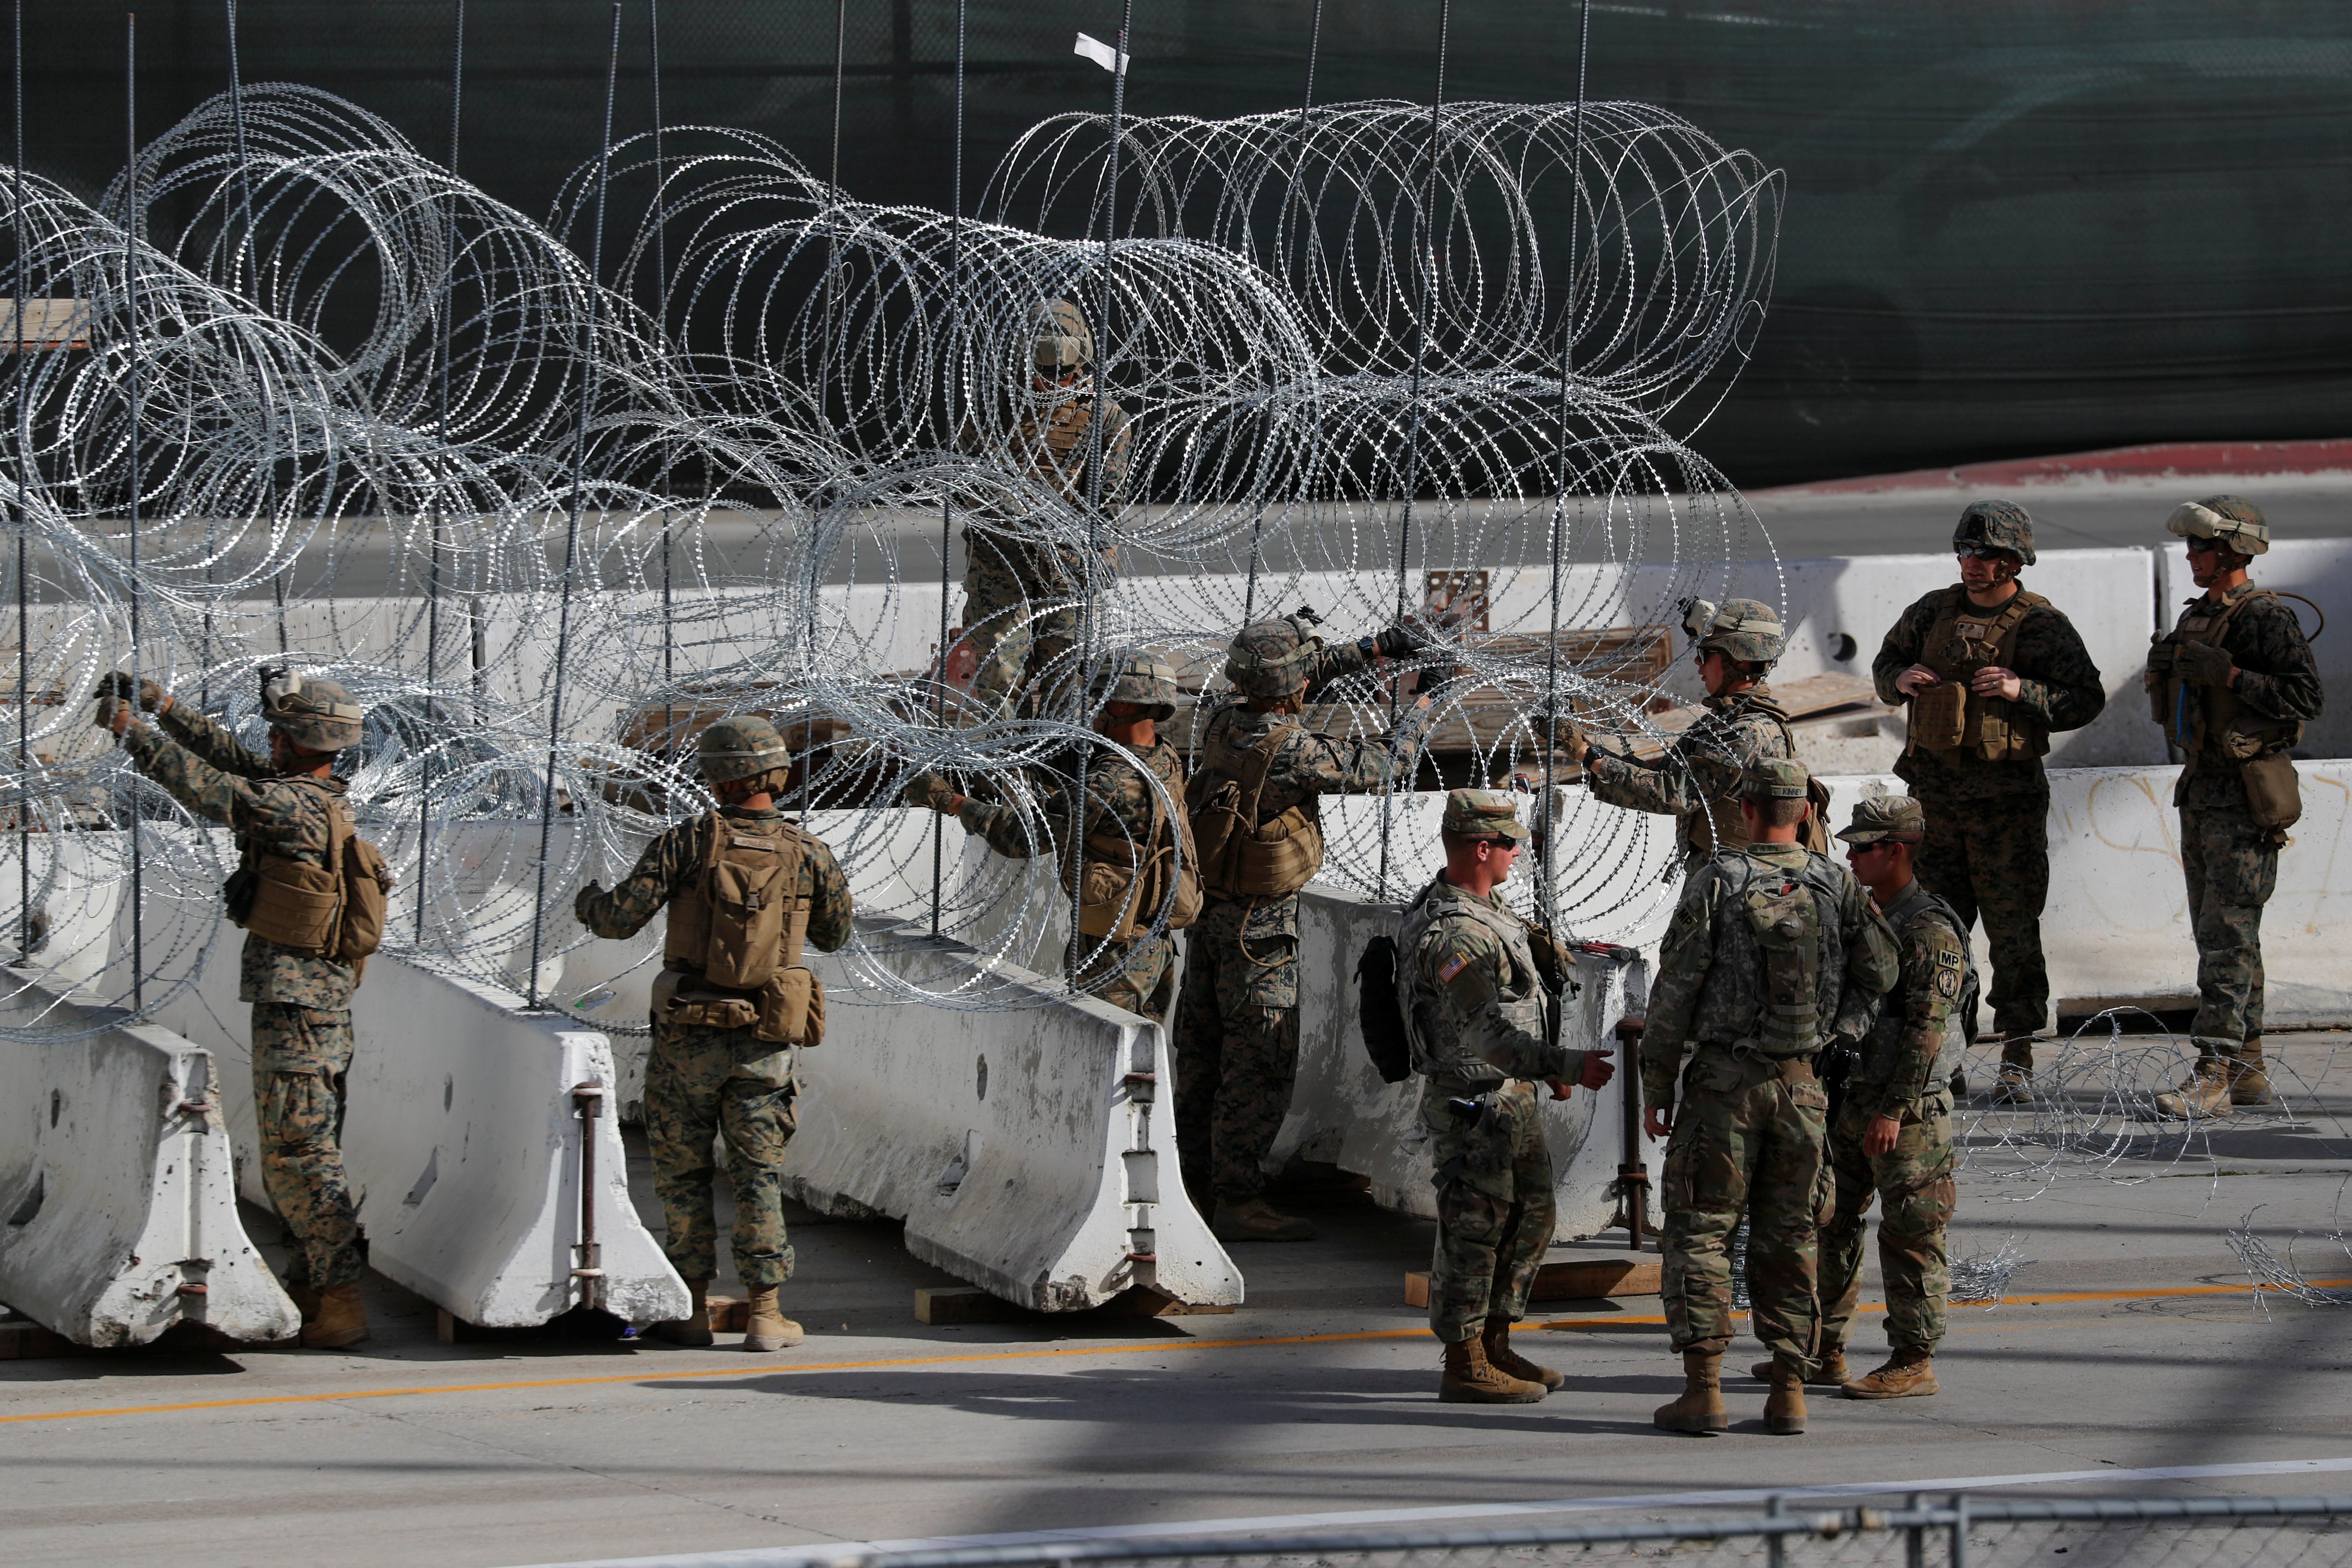 U.S. Marines help to build a concertina wire barricade at the U.S. Mexico border in preparation for the arrival of a caravan of migrants at the San Ysidro border crossing in San Diego